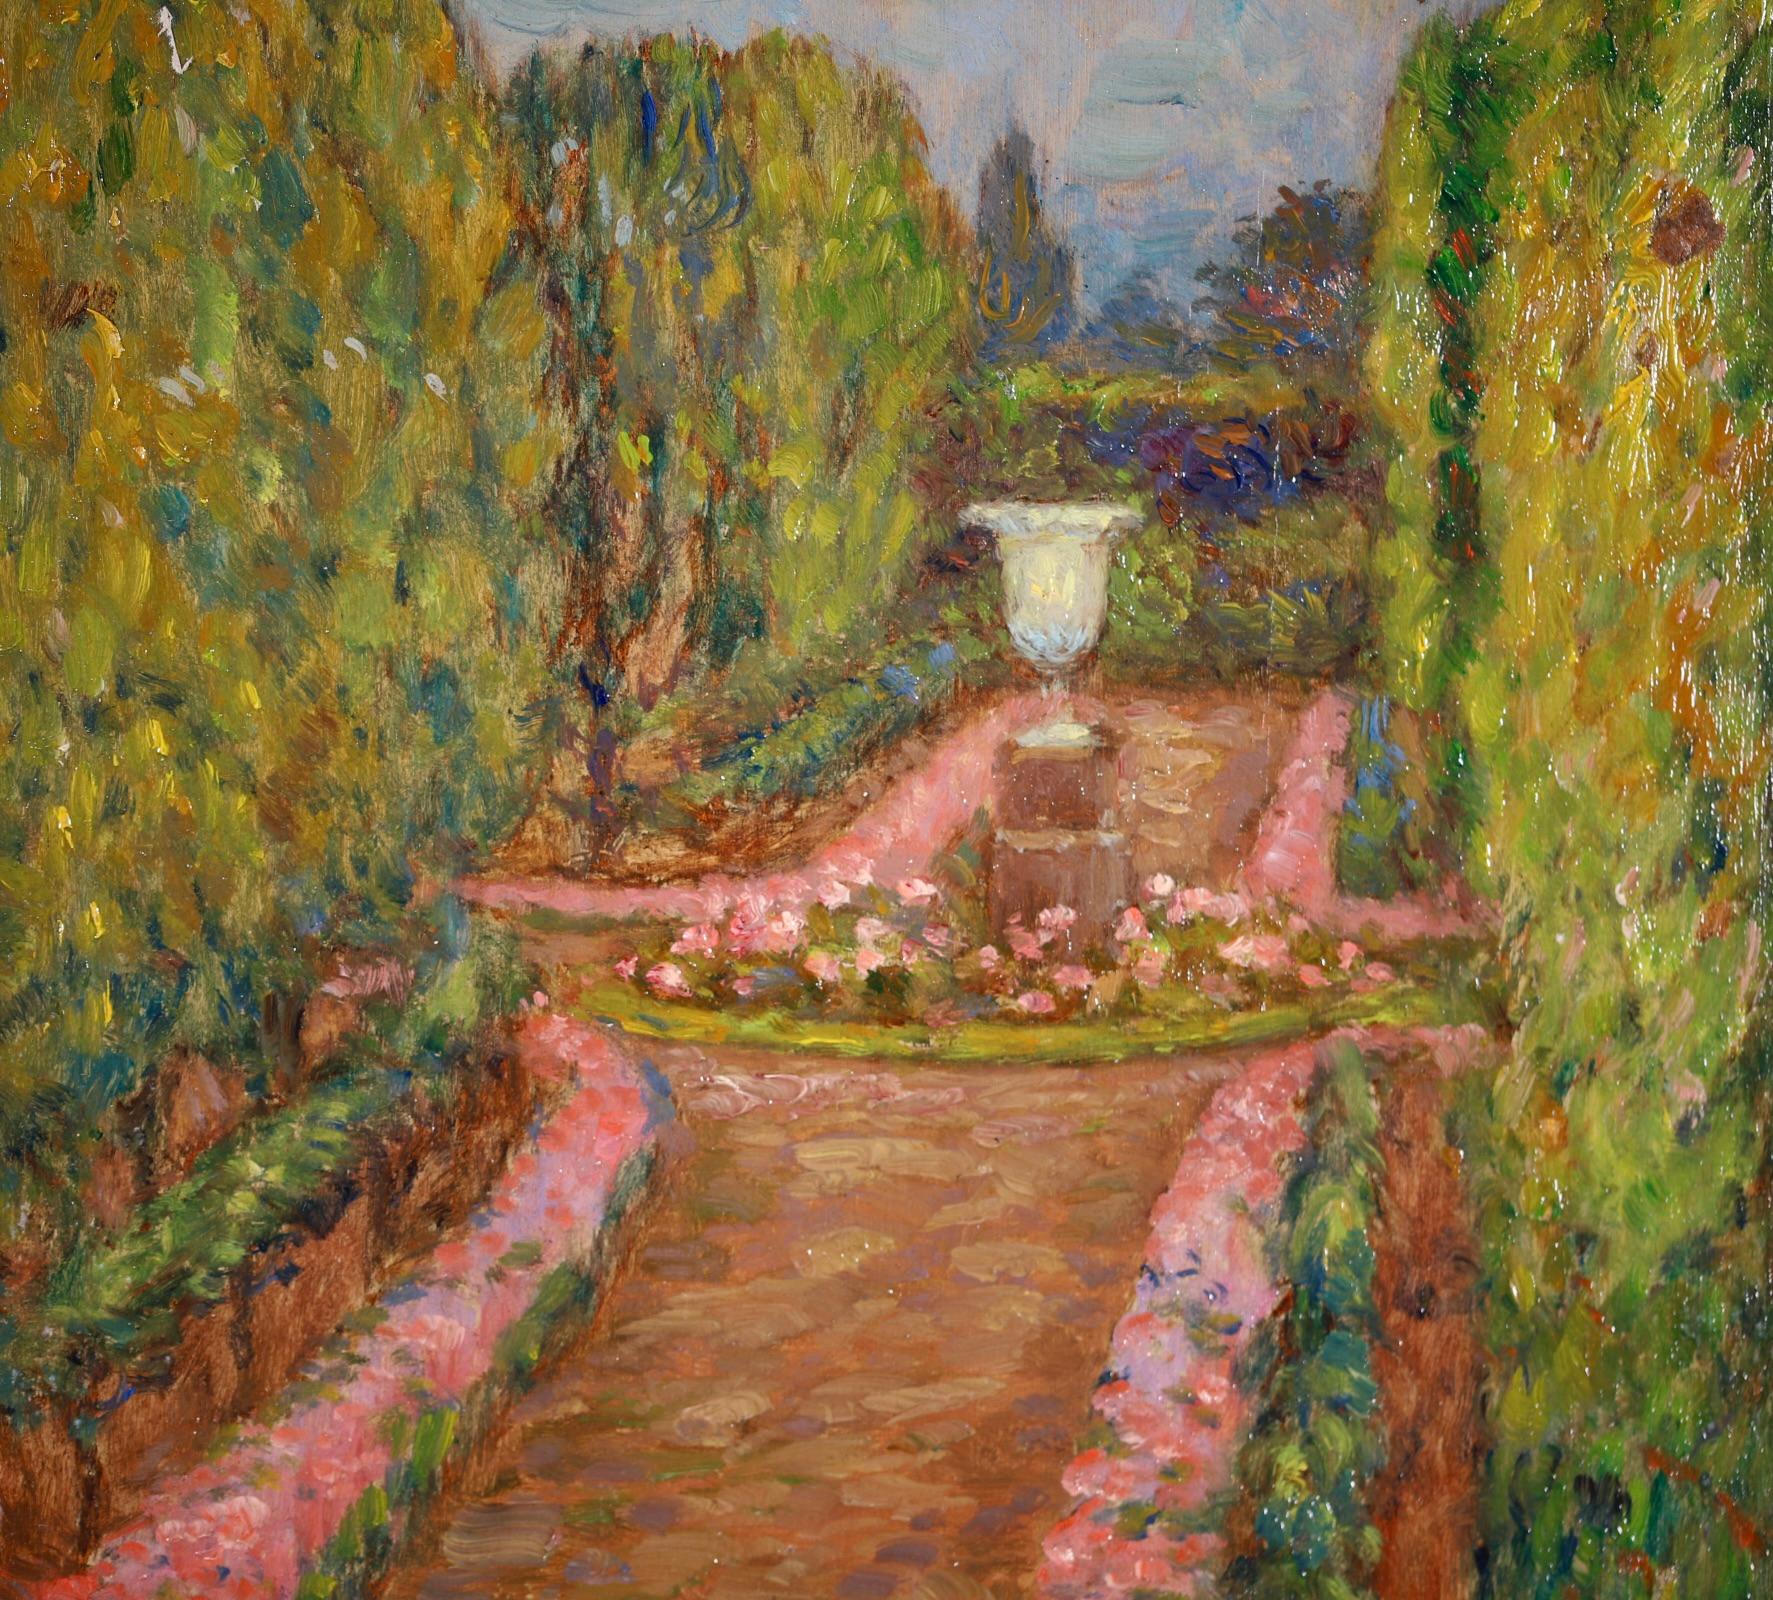 Impressionist garden landscape oil on panel painting circa 1902 by French painter Marie Duhem. The work depicts a white ornate planter in the centre of a garden path. The paths are lined with beds of pink flowers and green hedges. White clouds are